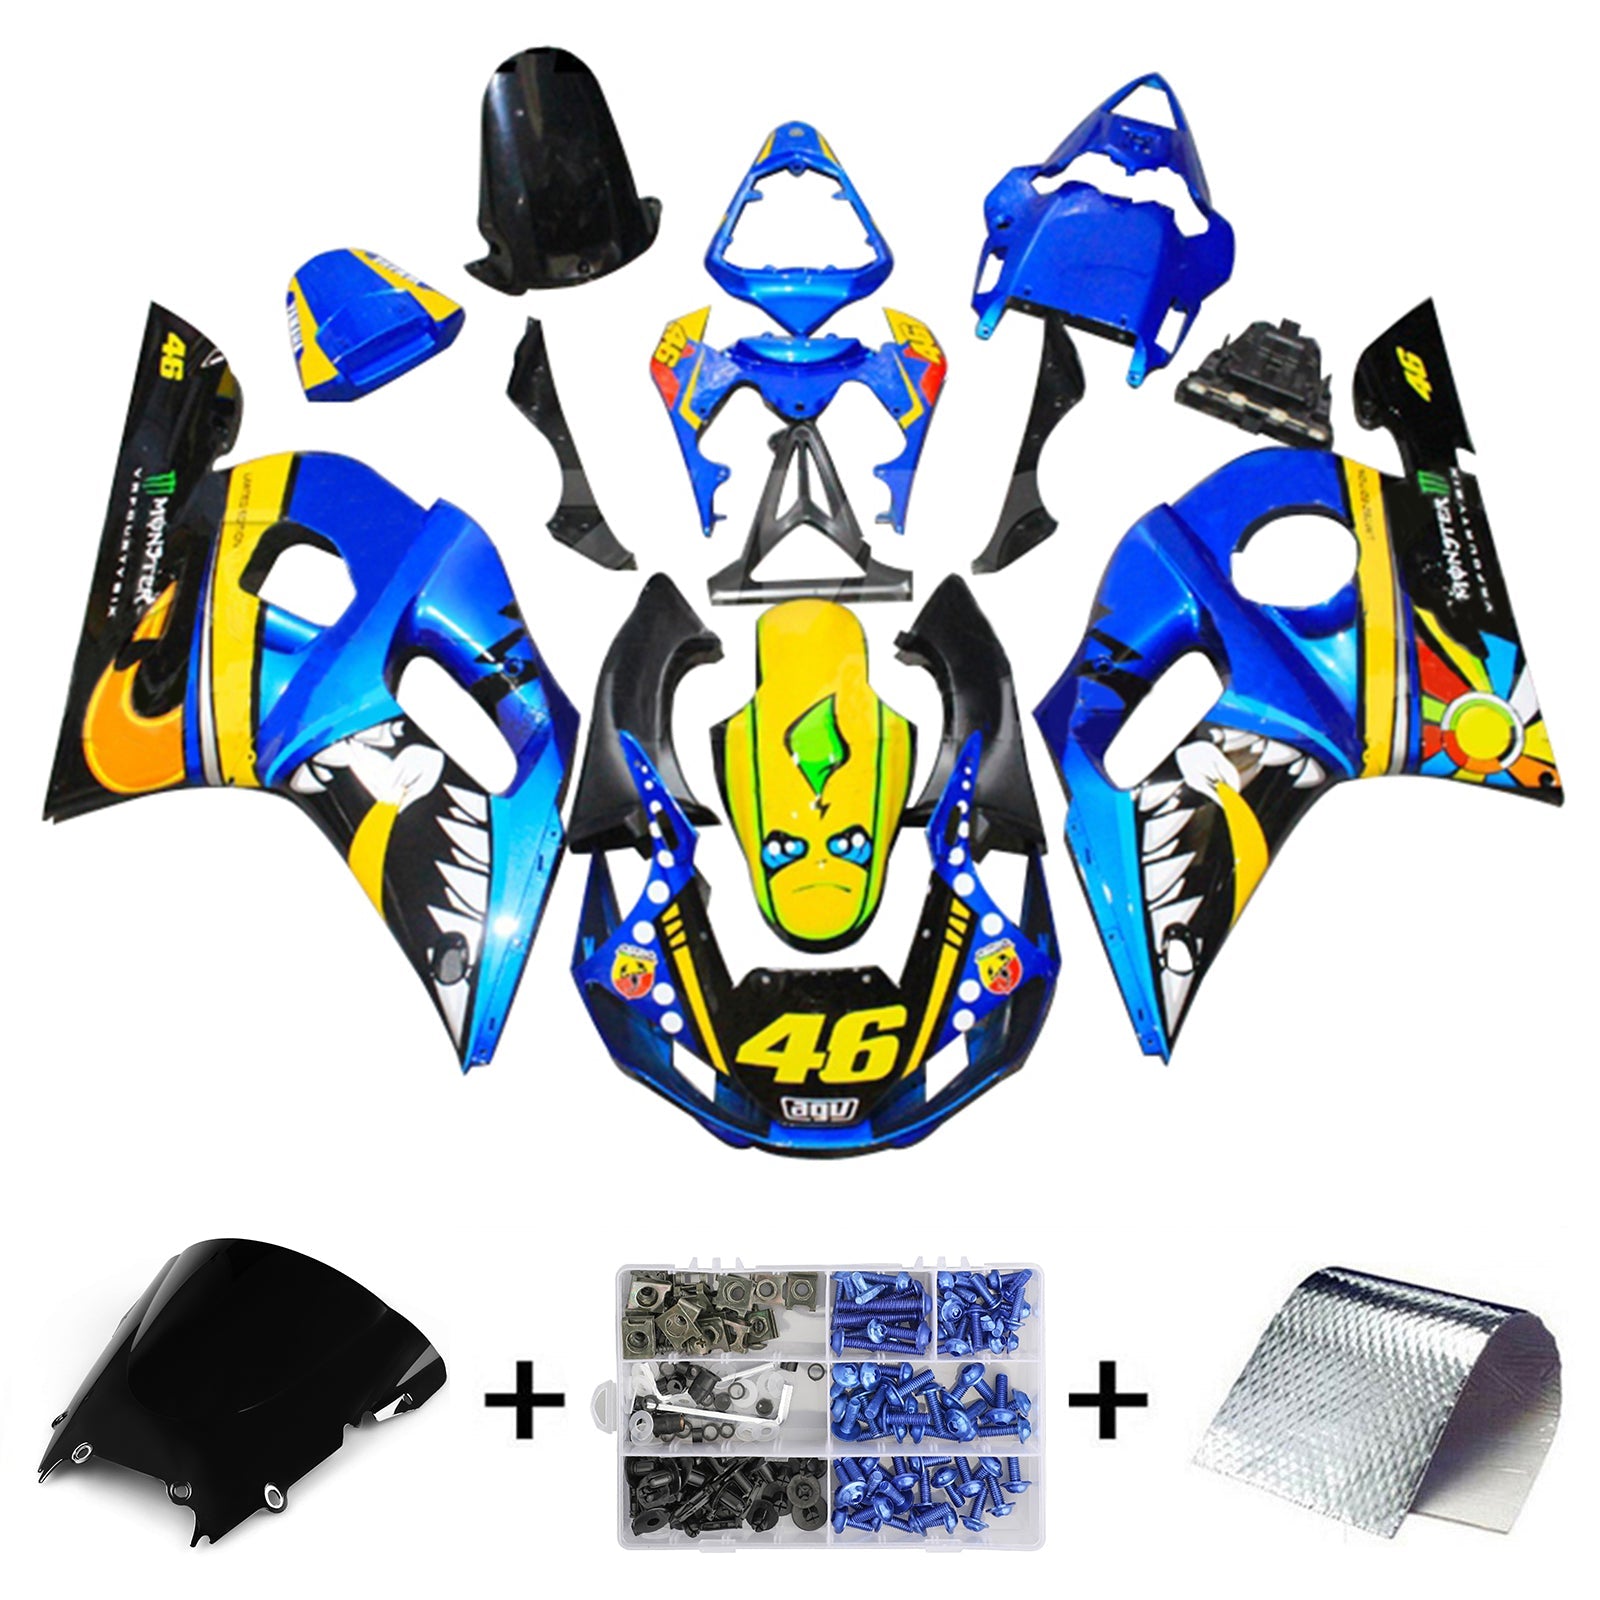 Amotopart Kit carena carrozzeria in plastica ABS per Yamaha YZF 600 R6 1998-2002